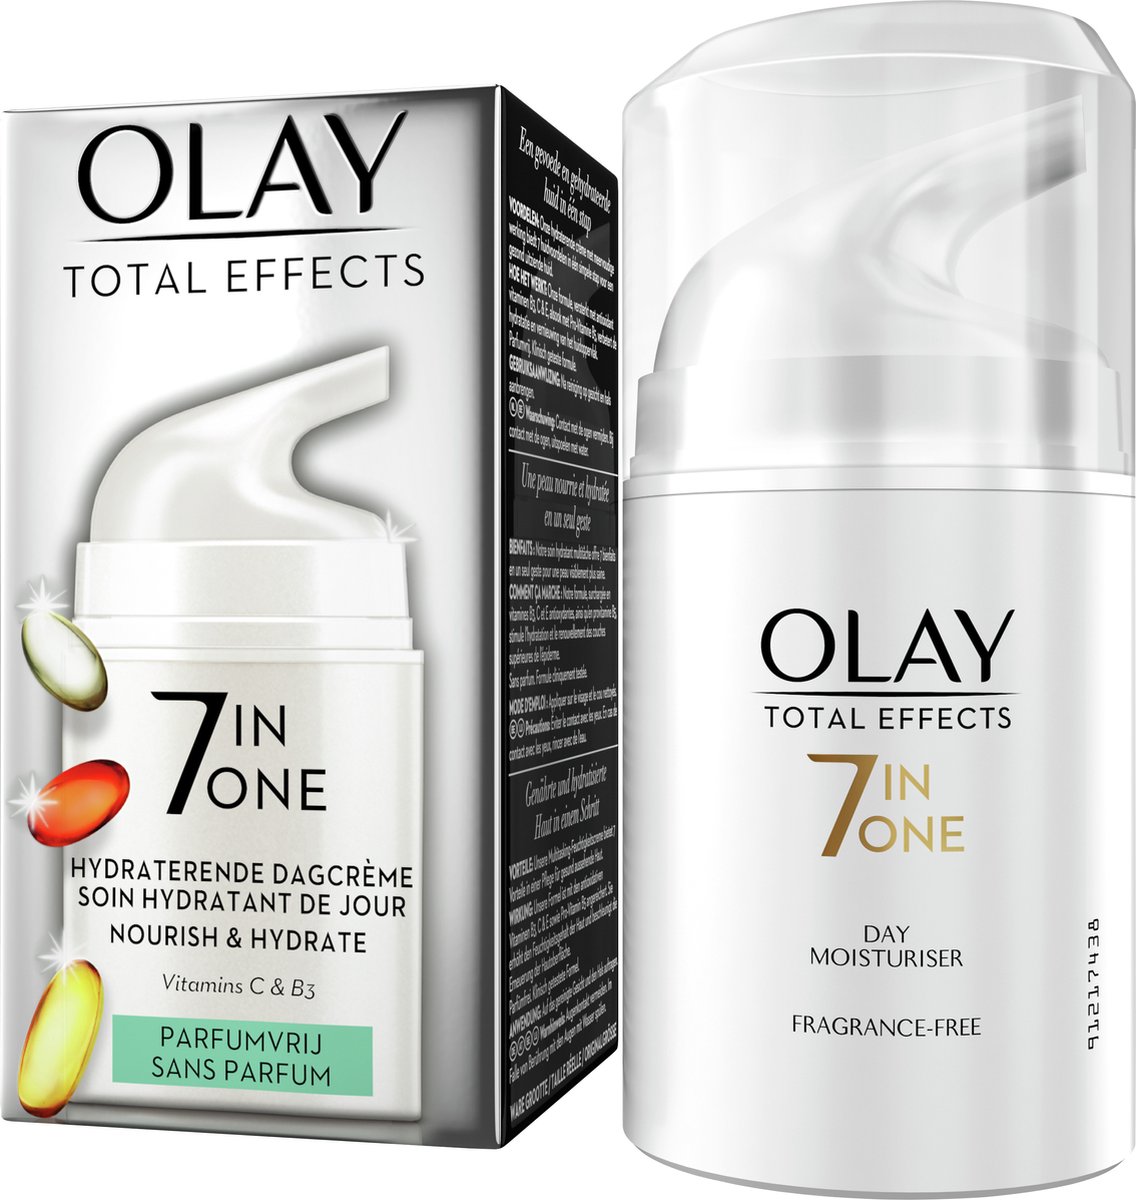 Olay Total Effects 7-in-1 - Hydraterende Dagcrème - Parfumvrij - 50 ml - Olay